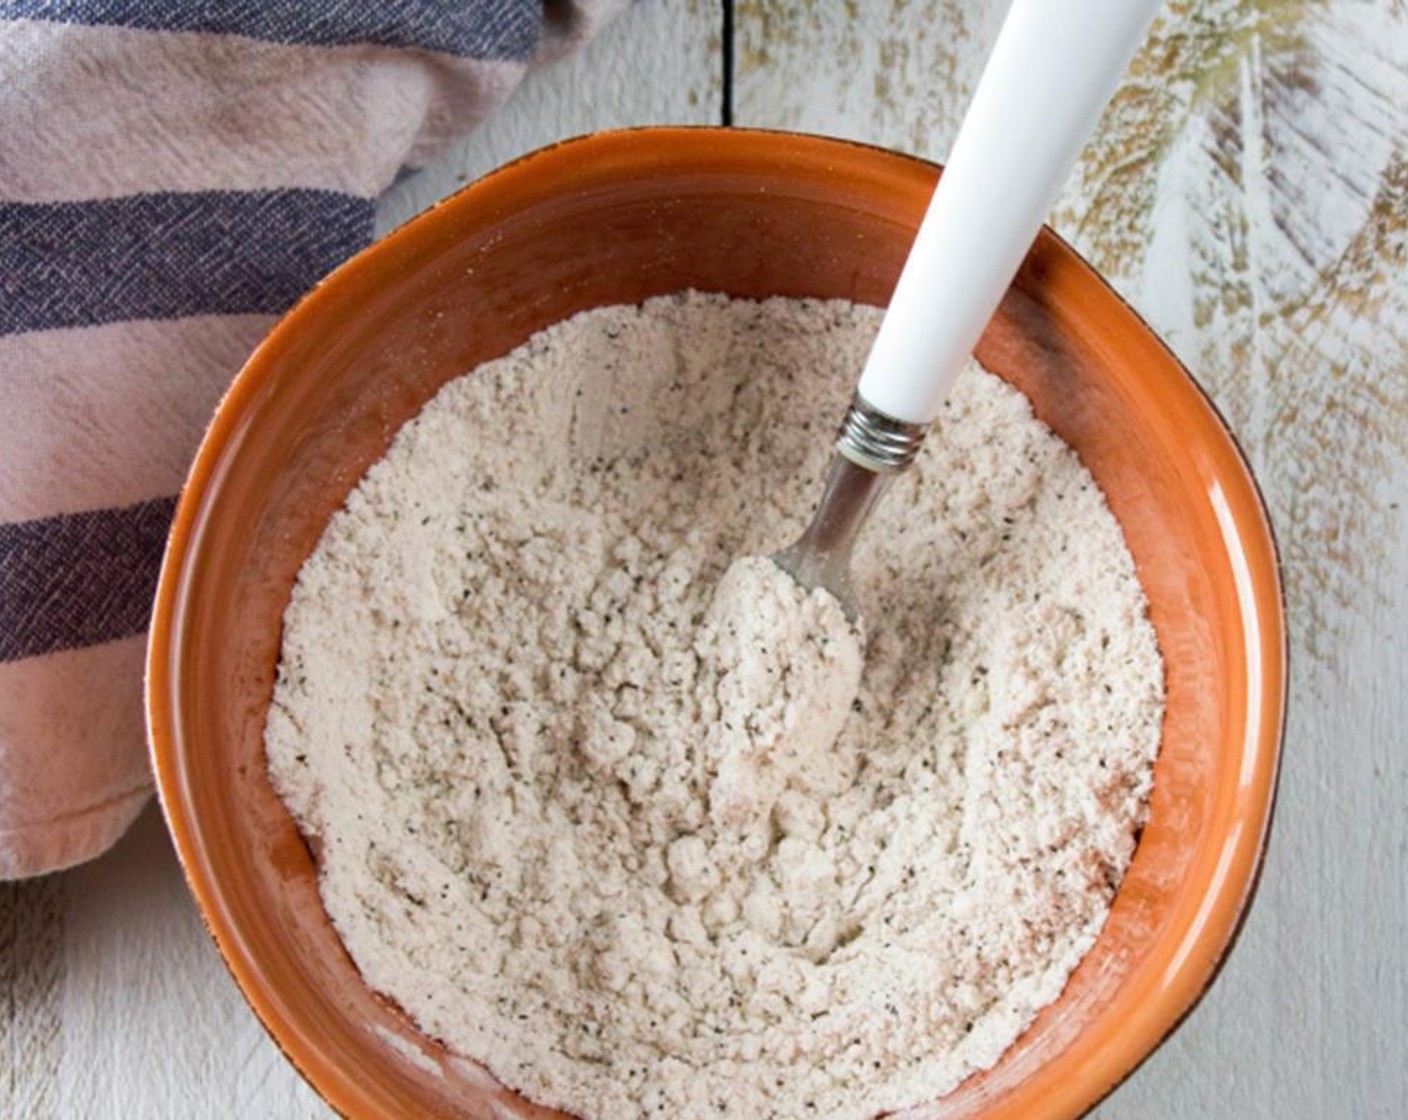 step 3 In separate bowl mix together Gluten-Free All-Purpose Flour (1/2 cup), Ground Black Pepper (1 tsp), Paprika (1 tsp) and Salt (1 tsp).